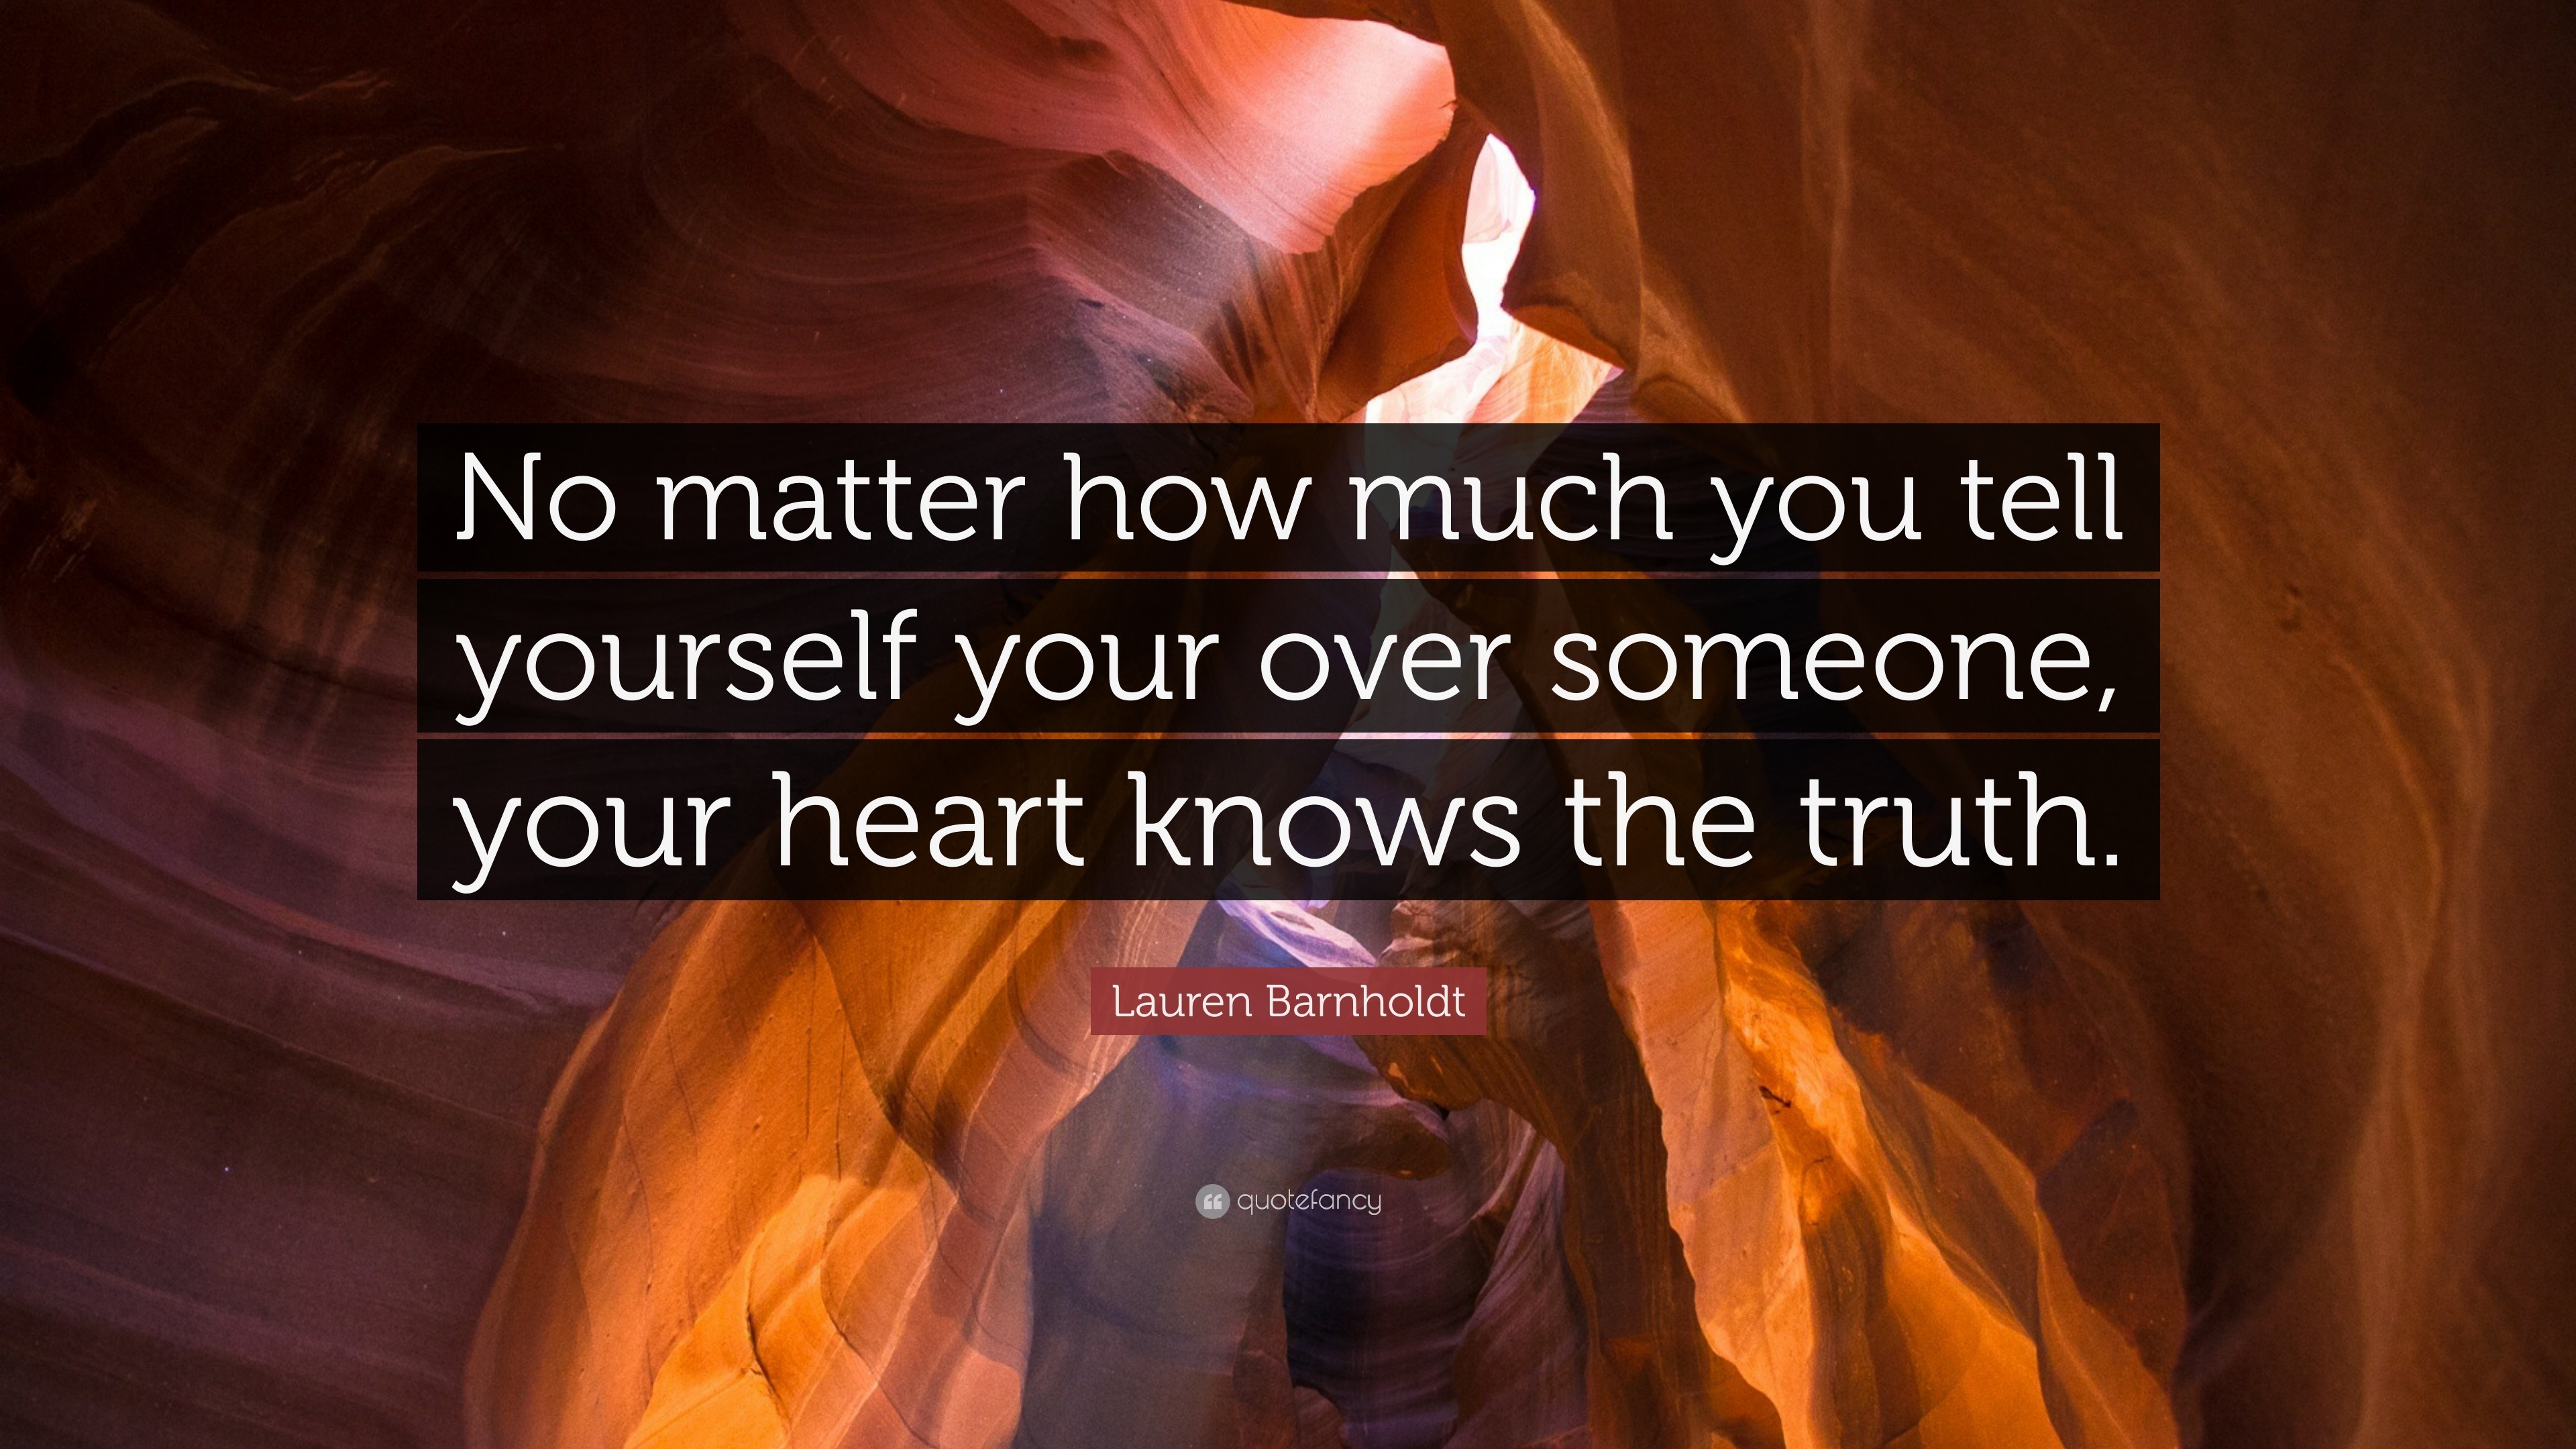 Lauren Barnholdt Quote No Matter How Much You Tell Yourself Your Over Someone Your Heart Knows